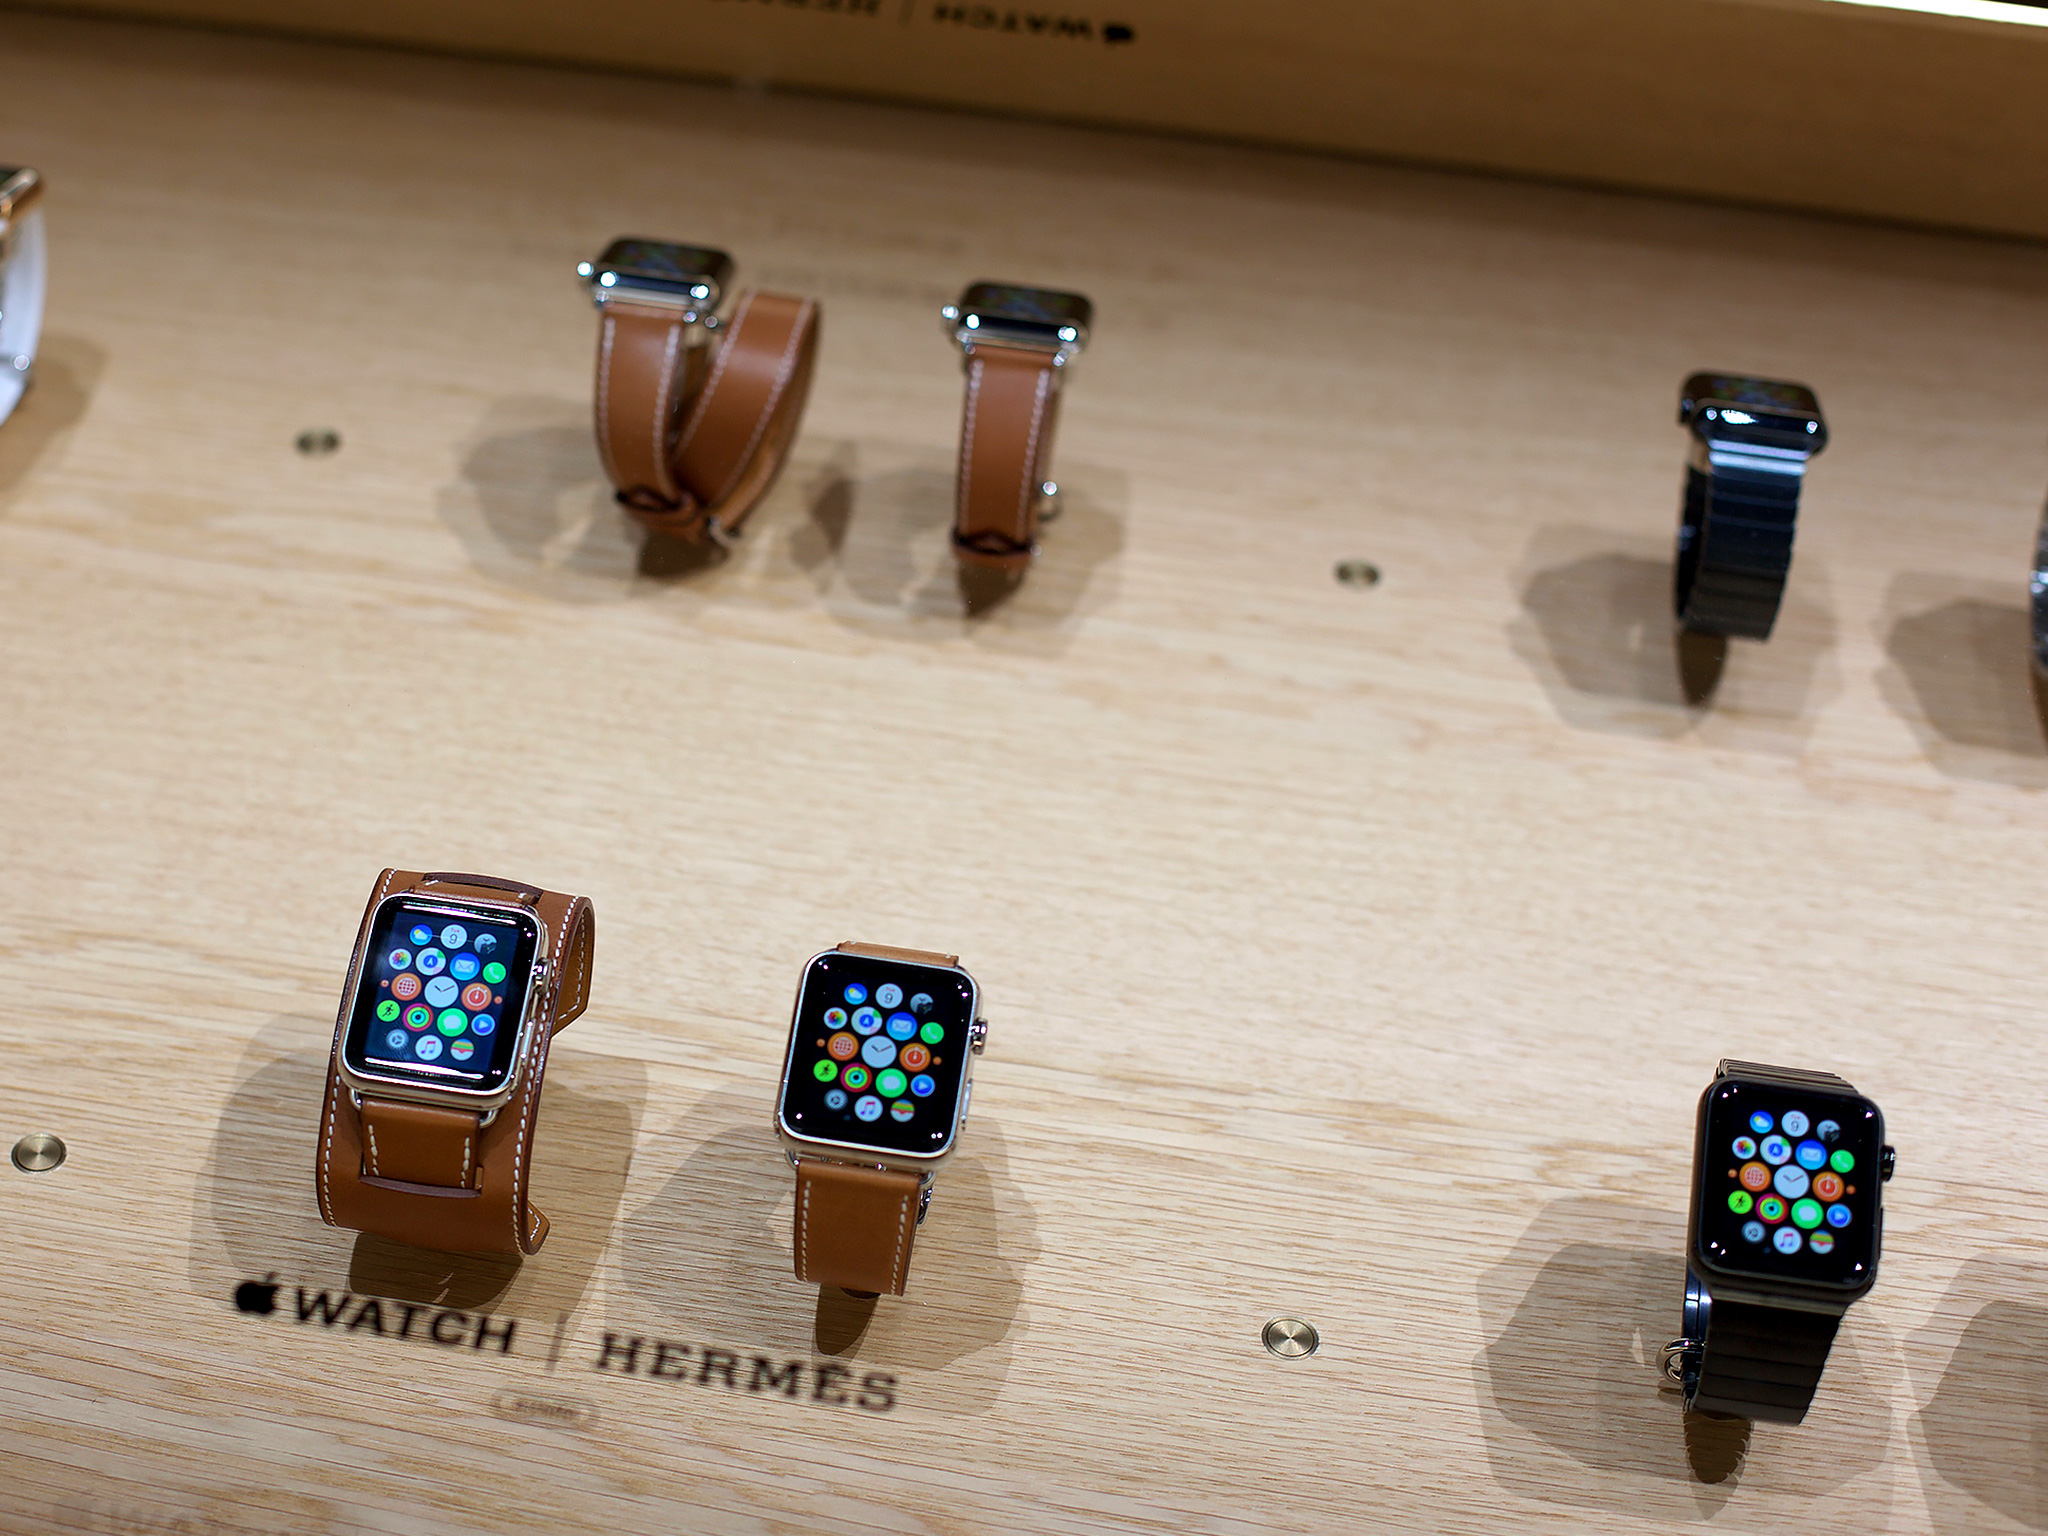 Apple Watch Hermès launches tomorrow, here's everything you need to